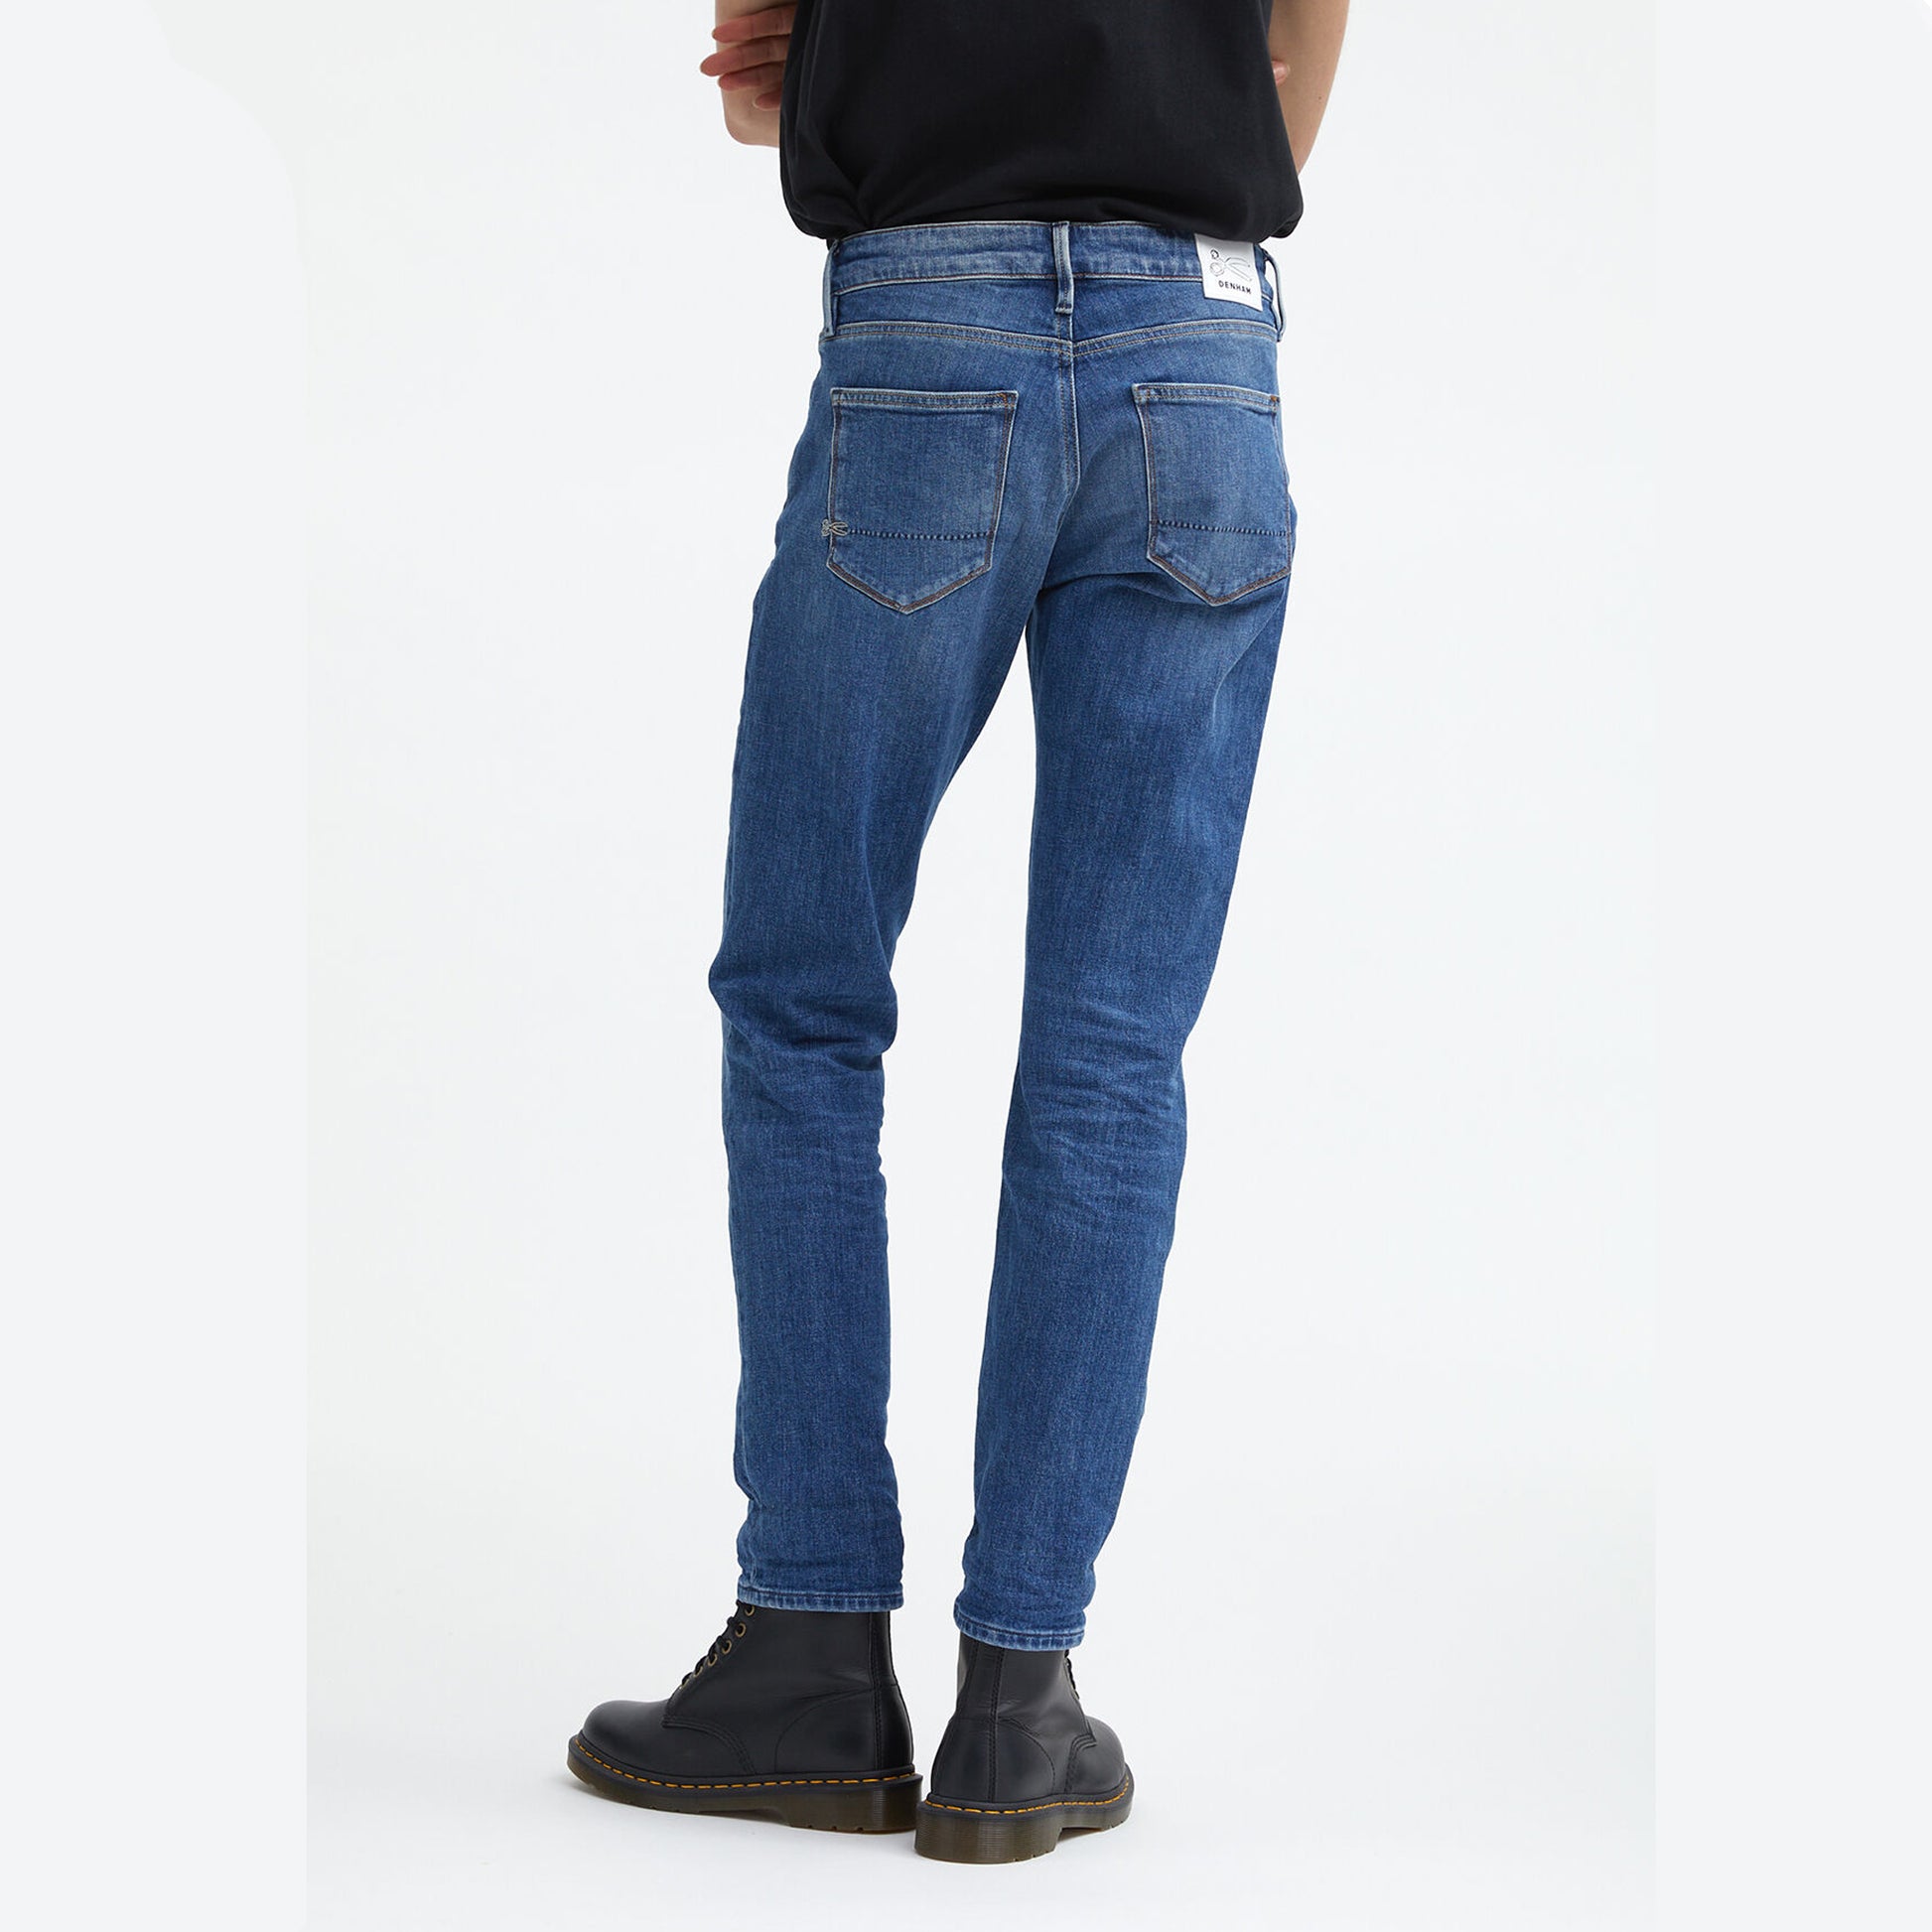 The back view of a man wearing Denham's MONROE Mid Girlfriend - Light Fade & Whiskers blue jeans.